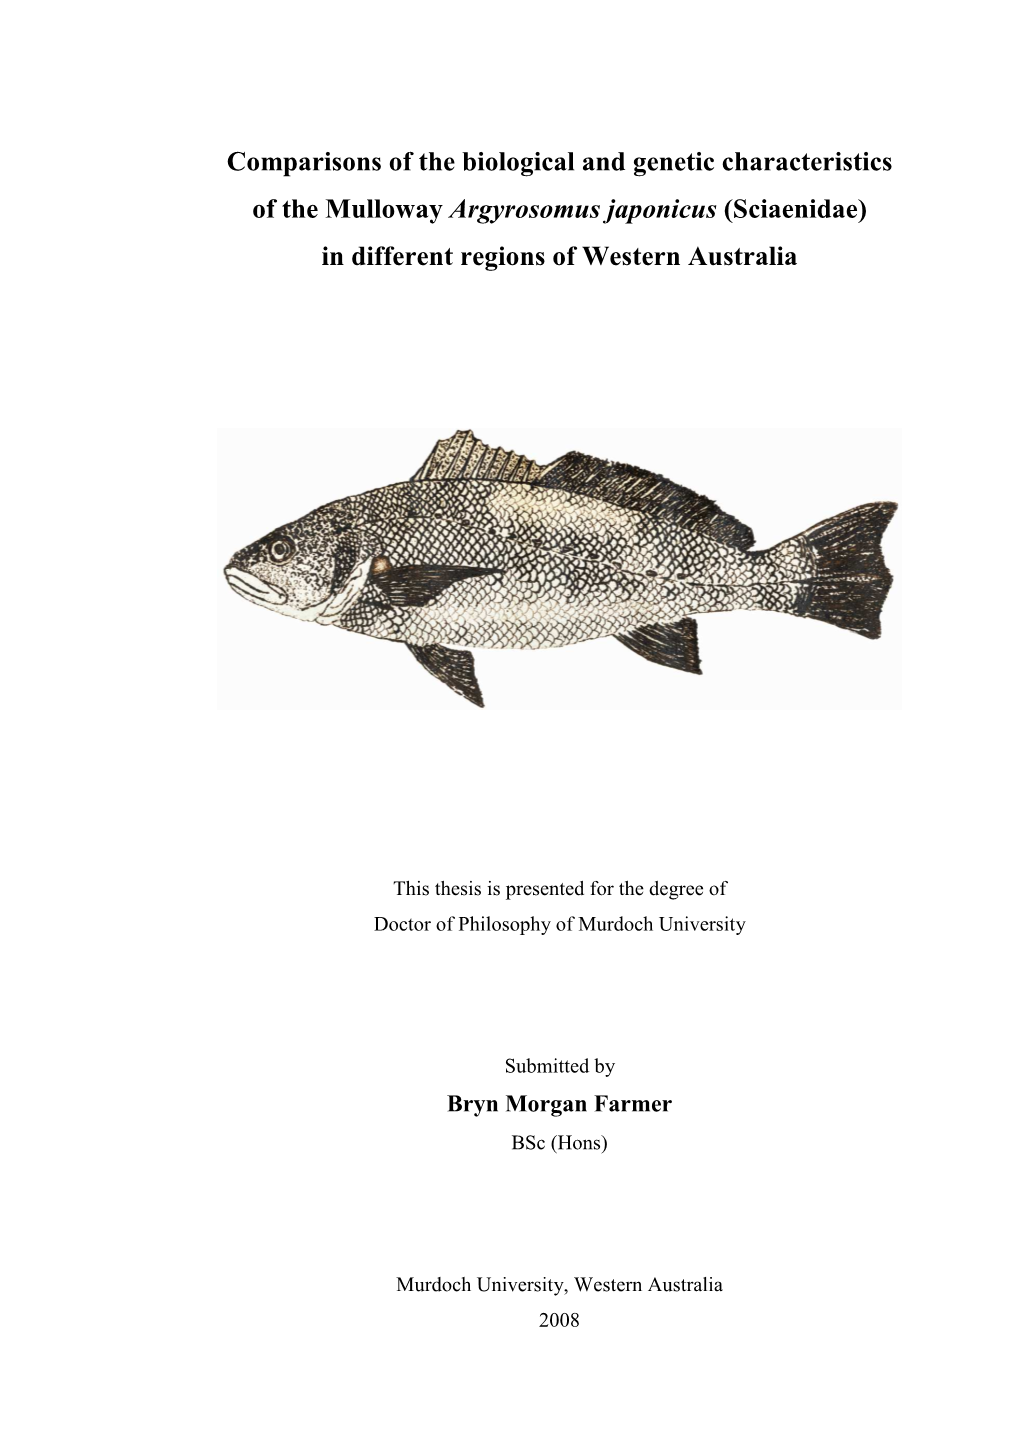 Comparisons of the Biological and Genetic Characteristics of the Mulloway Argyrosomus Japonicus (Sciaenidae) in Different Regions of Western Australia